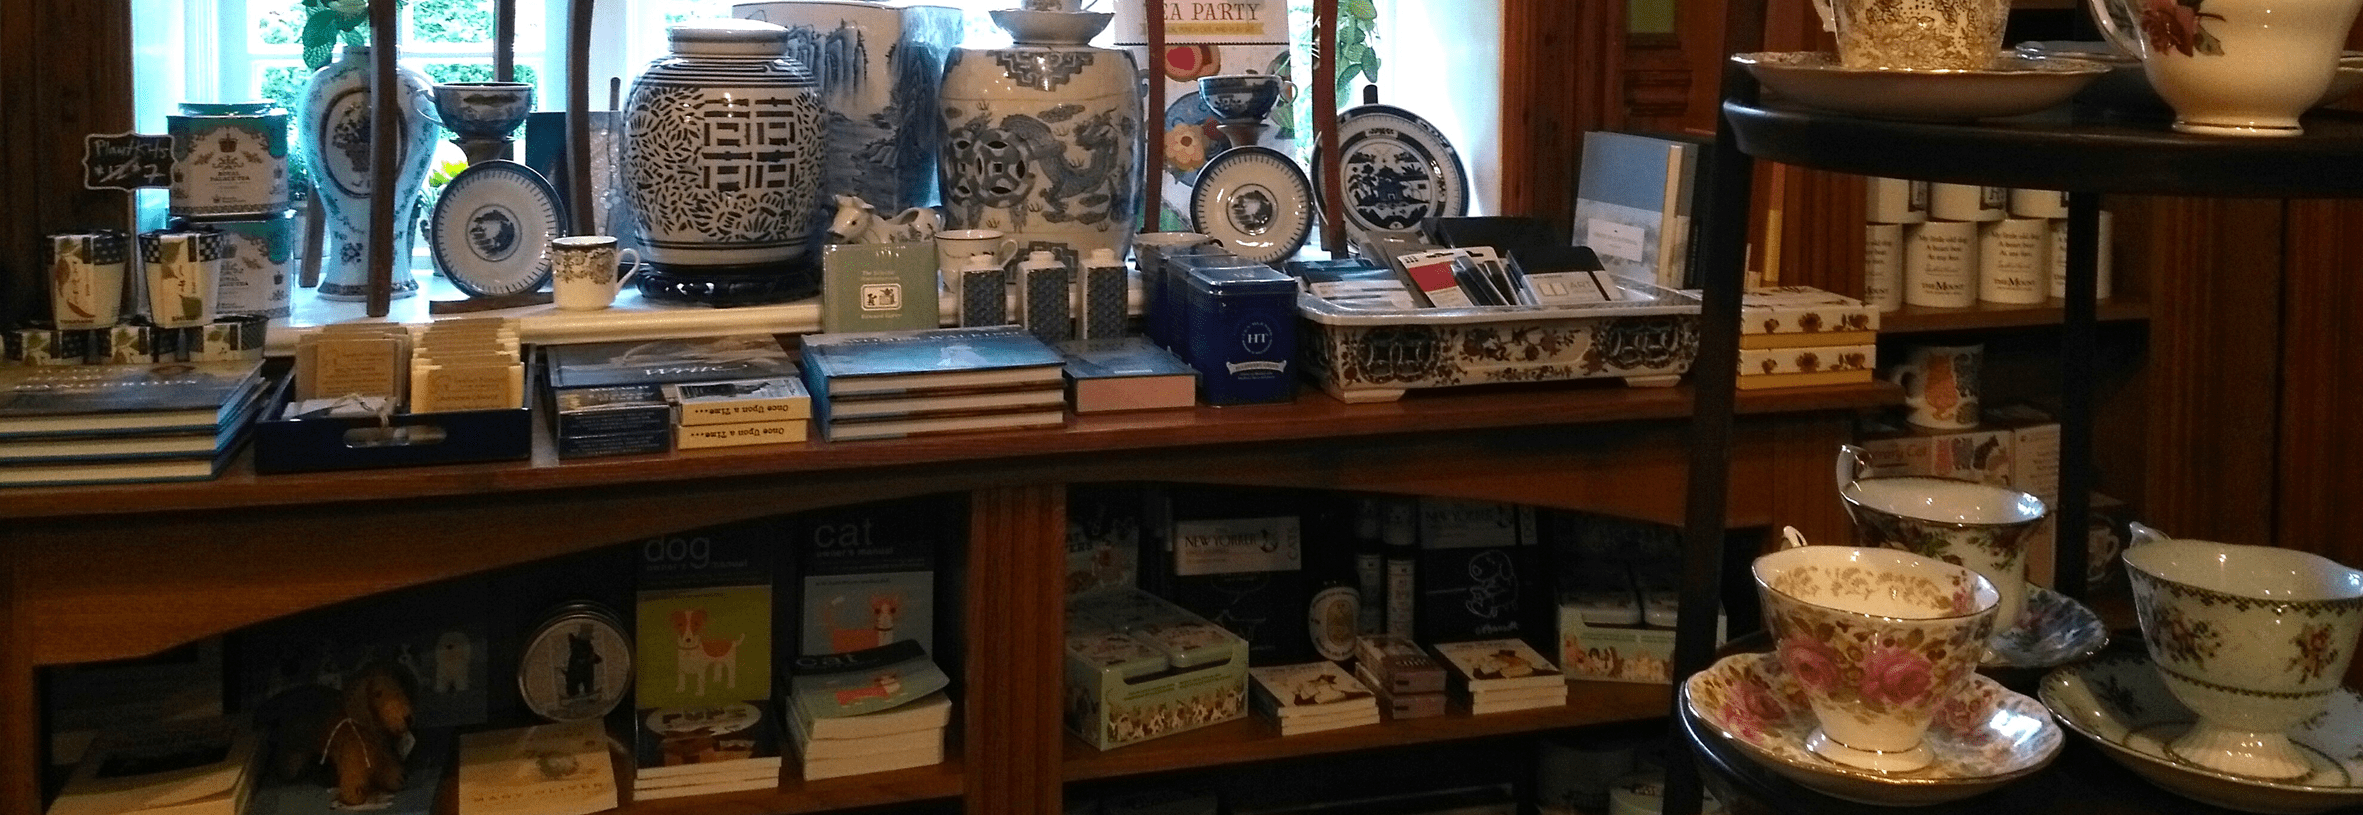 Books and porcelain tea cups on display at The Bookstore.